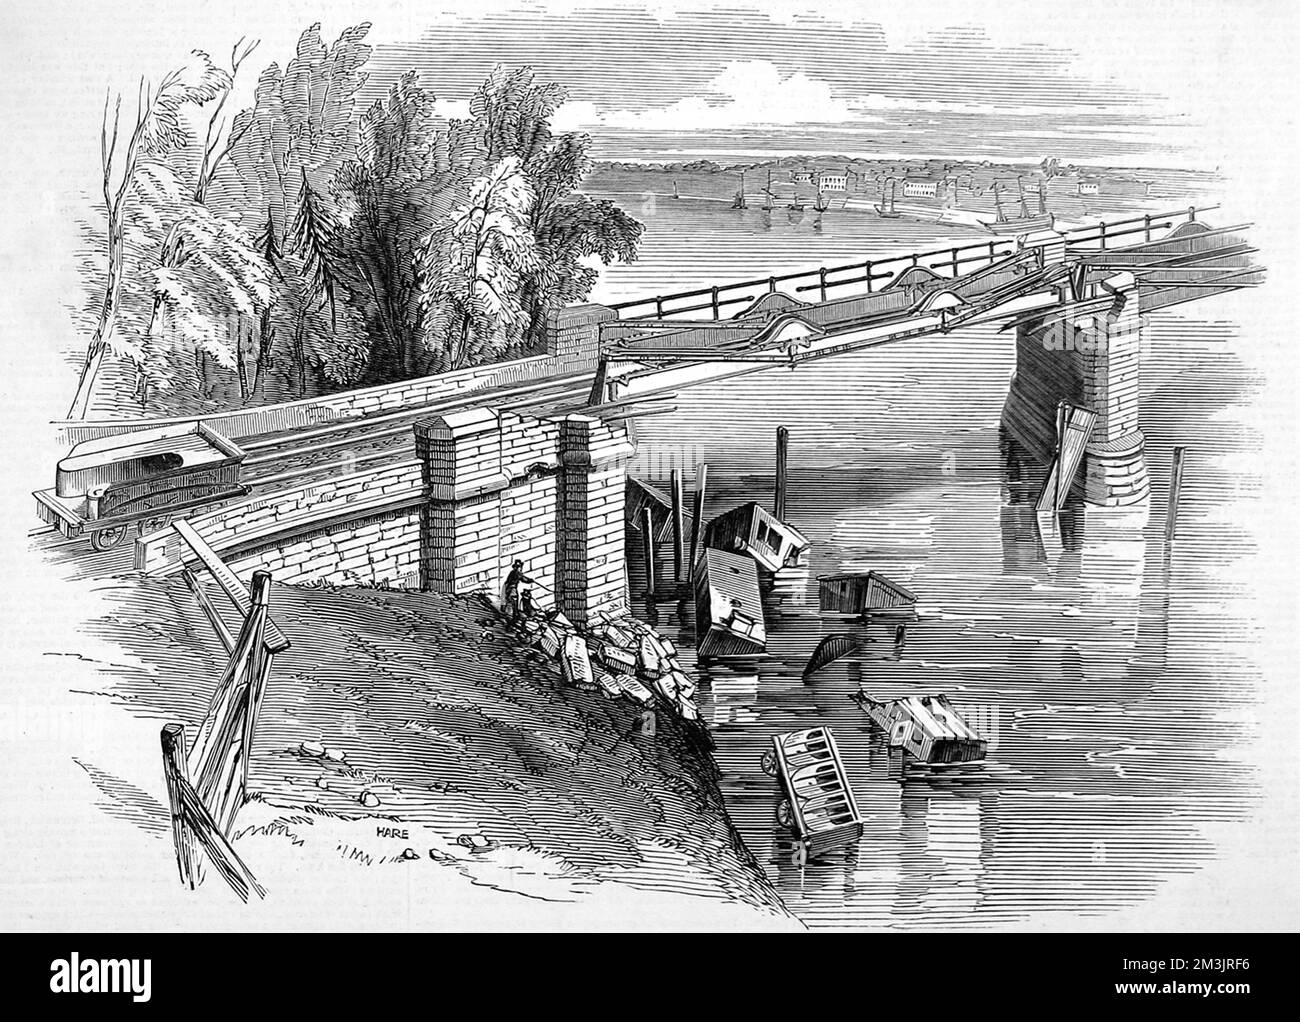 Railway accident at Chester showing a dilapidated span of the Dee Bridge. It was thought that the weight of the train caused it to strike a girder at which point the bridge gave way and the train plummeted through.     Date: 1847 Stock Photo